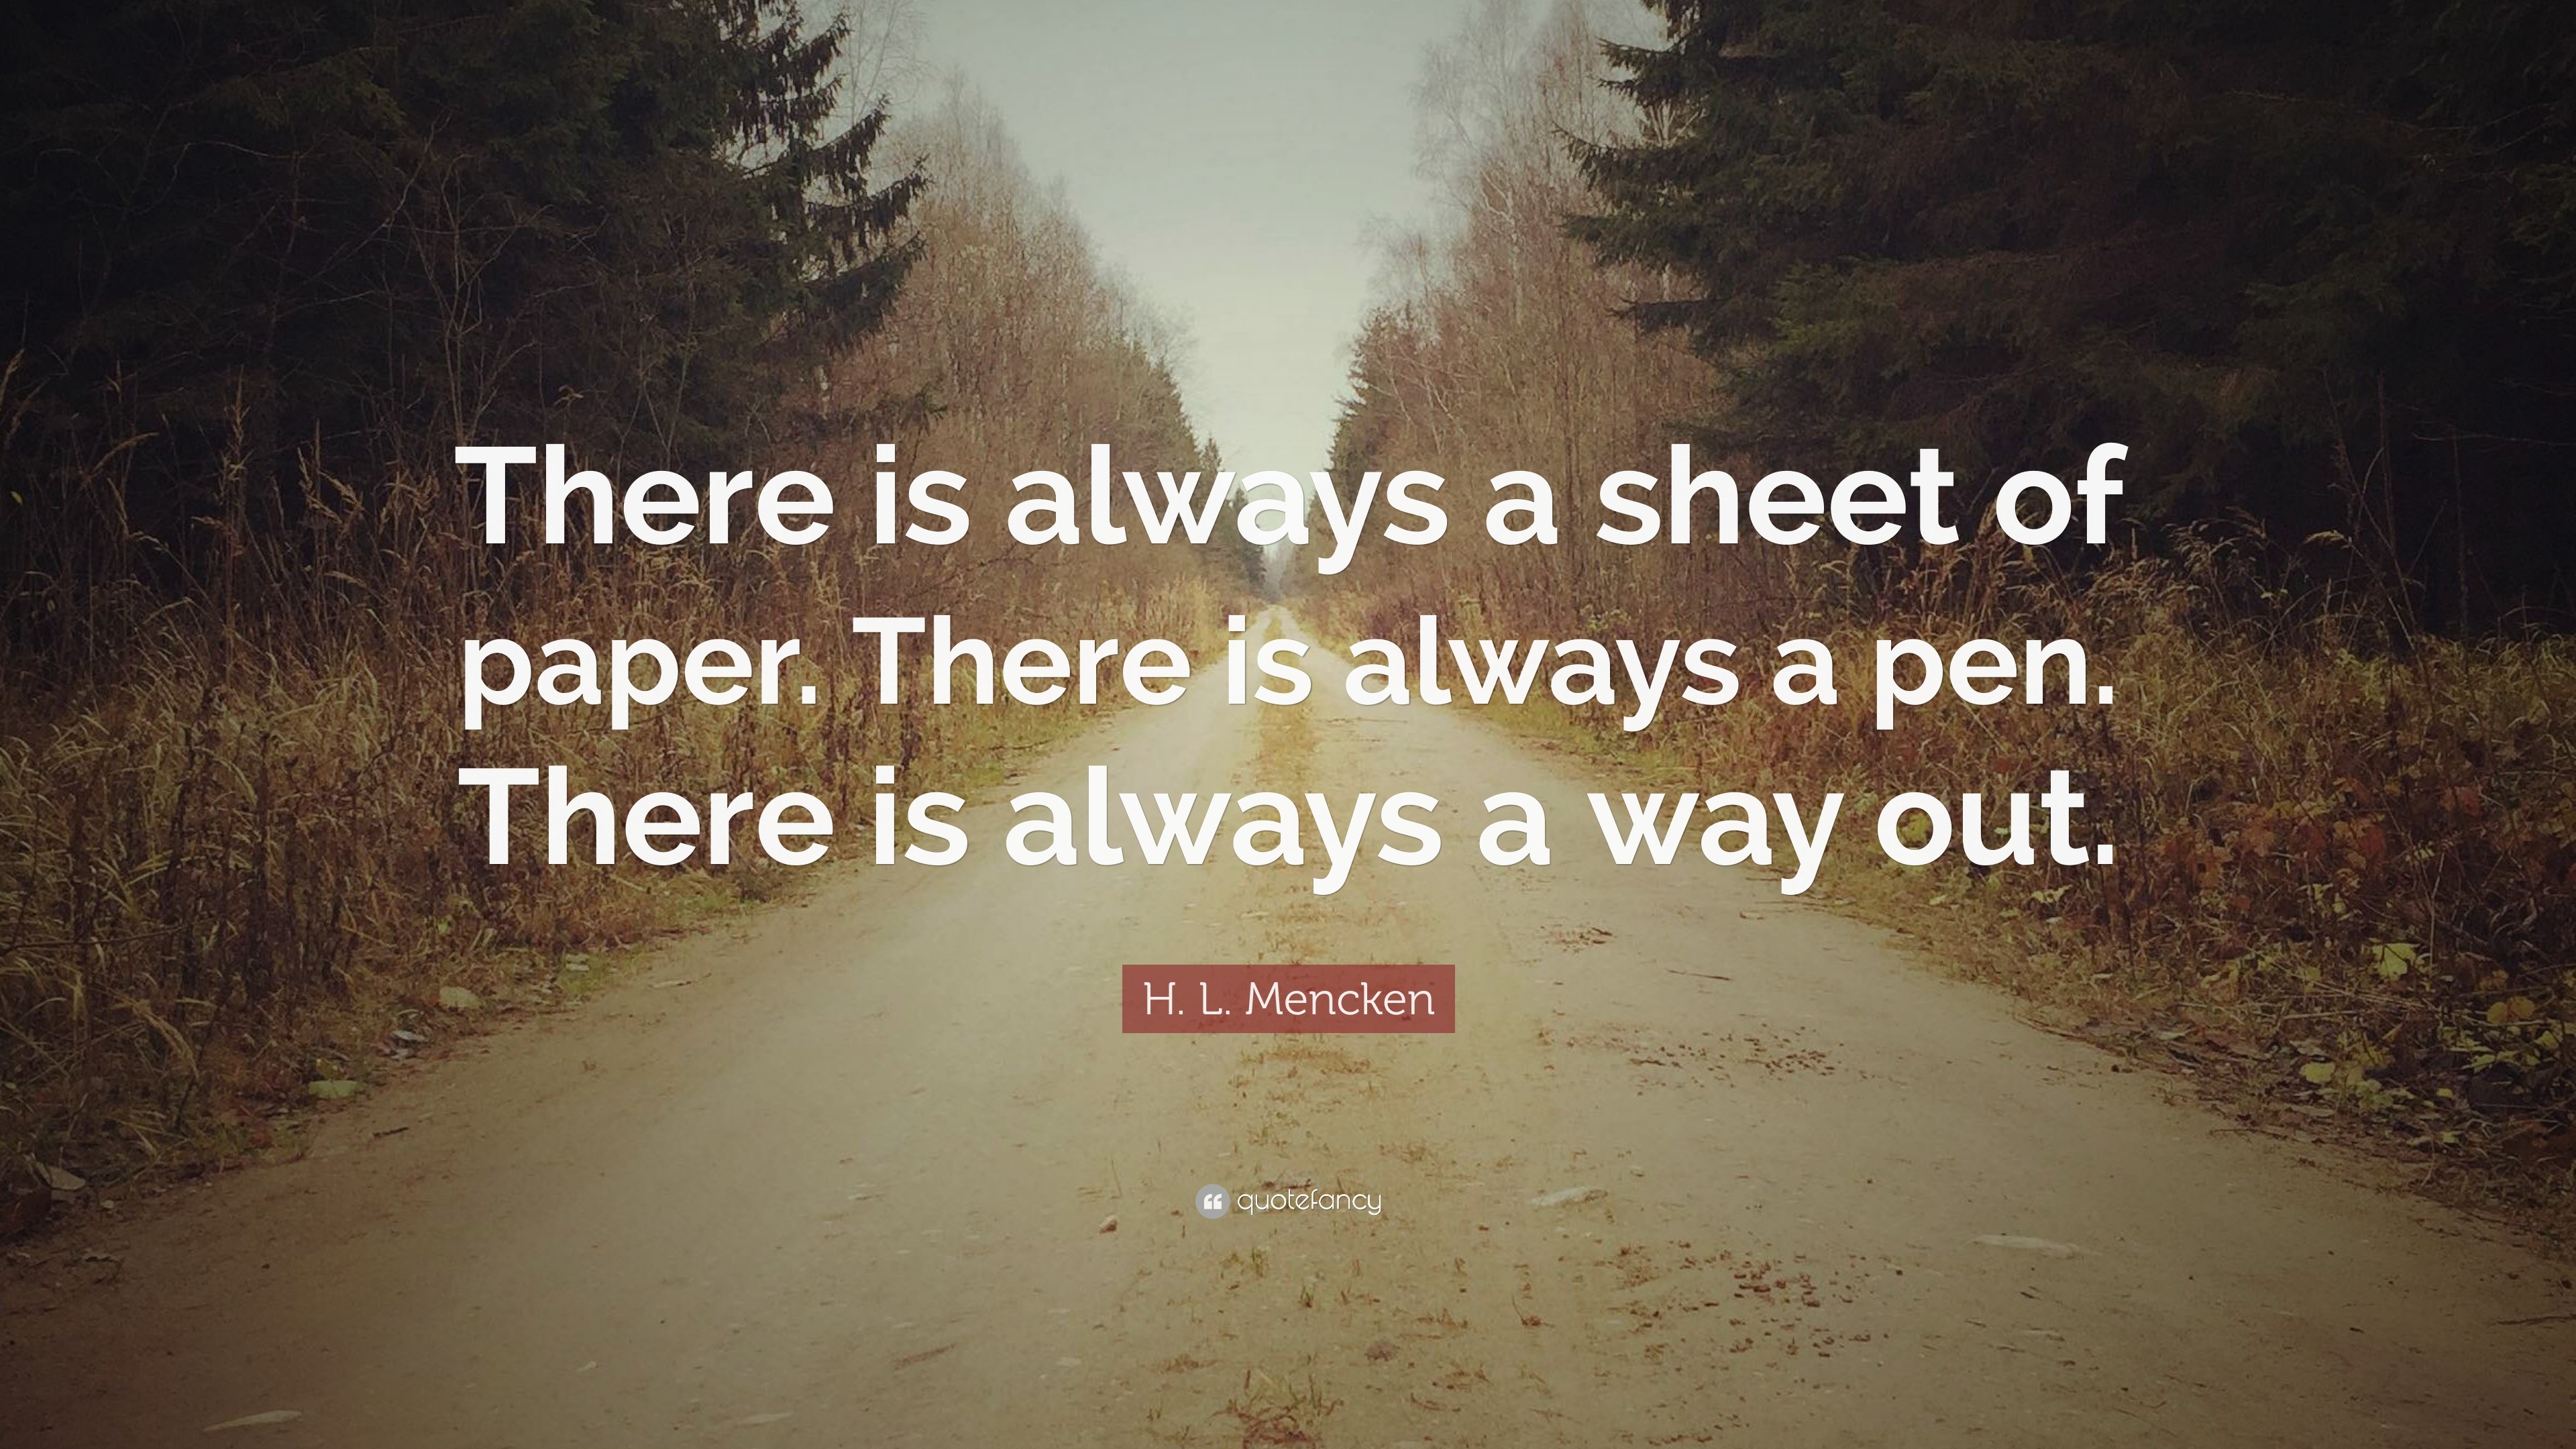 H. L. Mencken Quote: “There Is Always A Sheet Of Paper. There Is Always A Pen. There